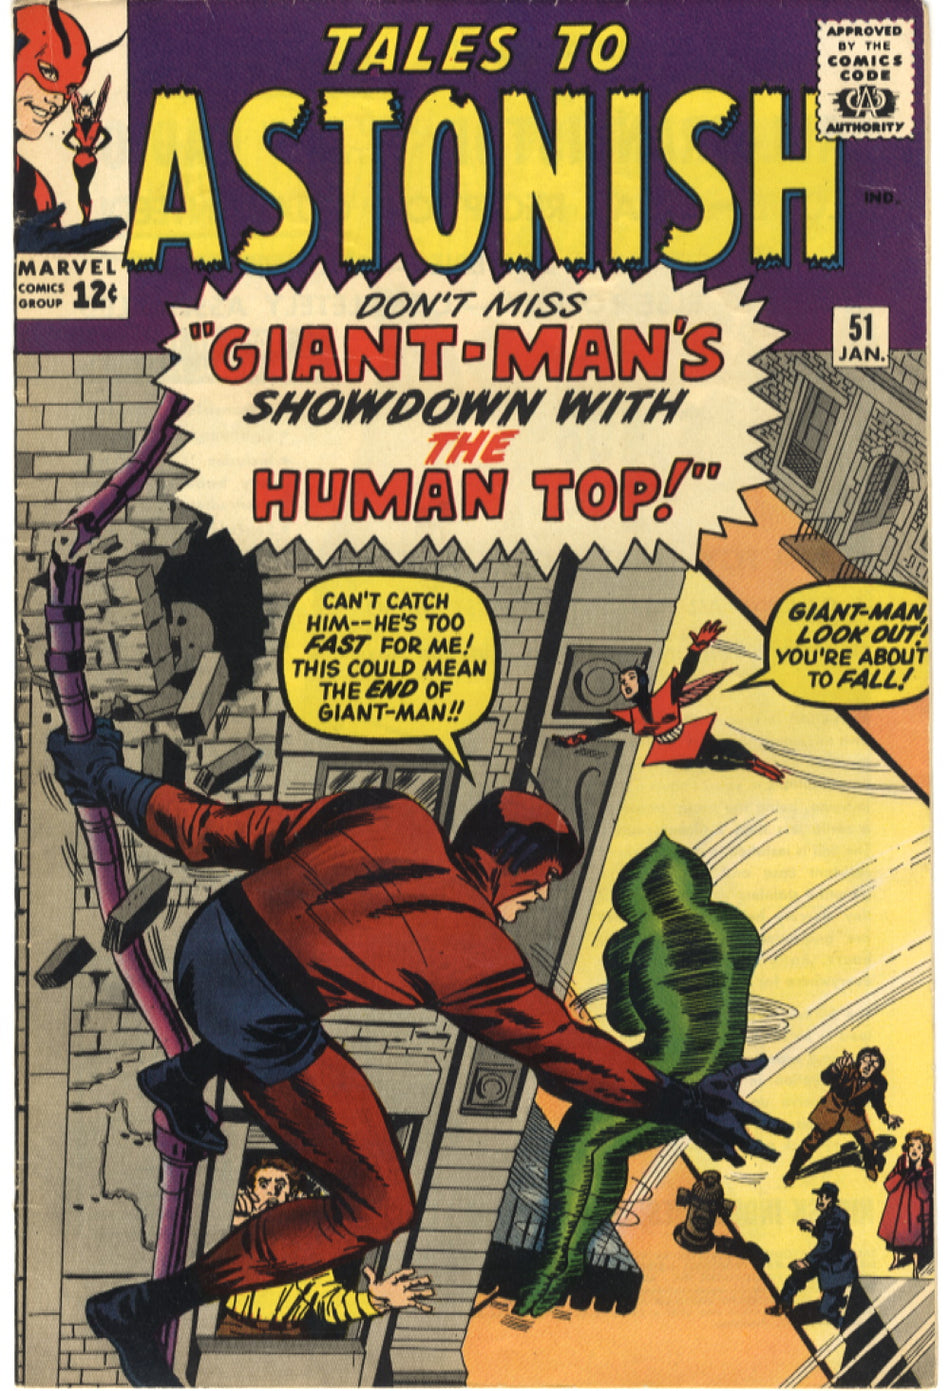 TALES TO ASTONISH 51 FN+ (6.5)